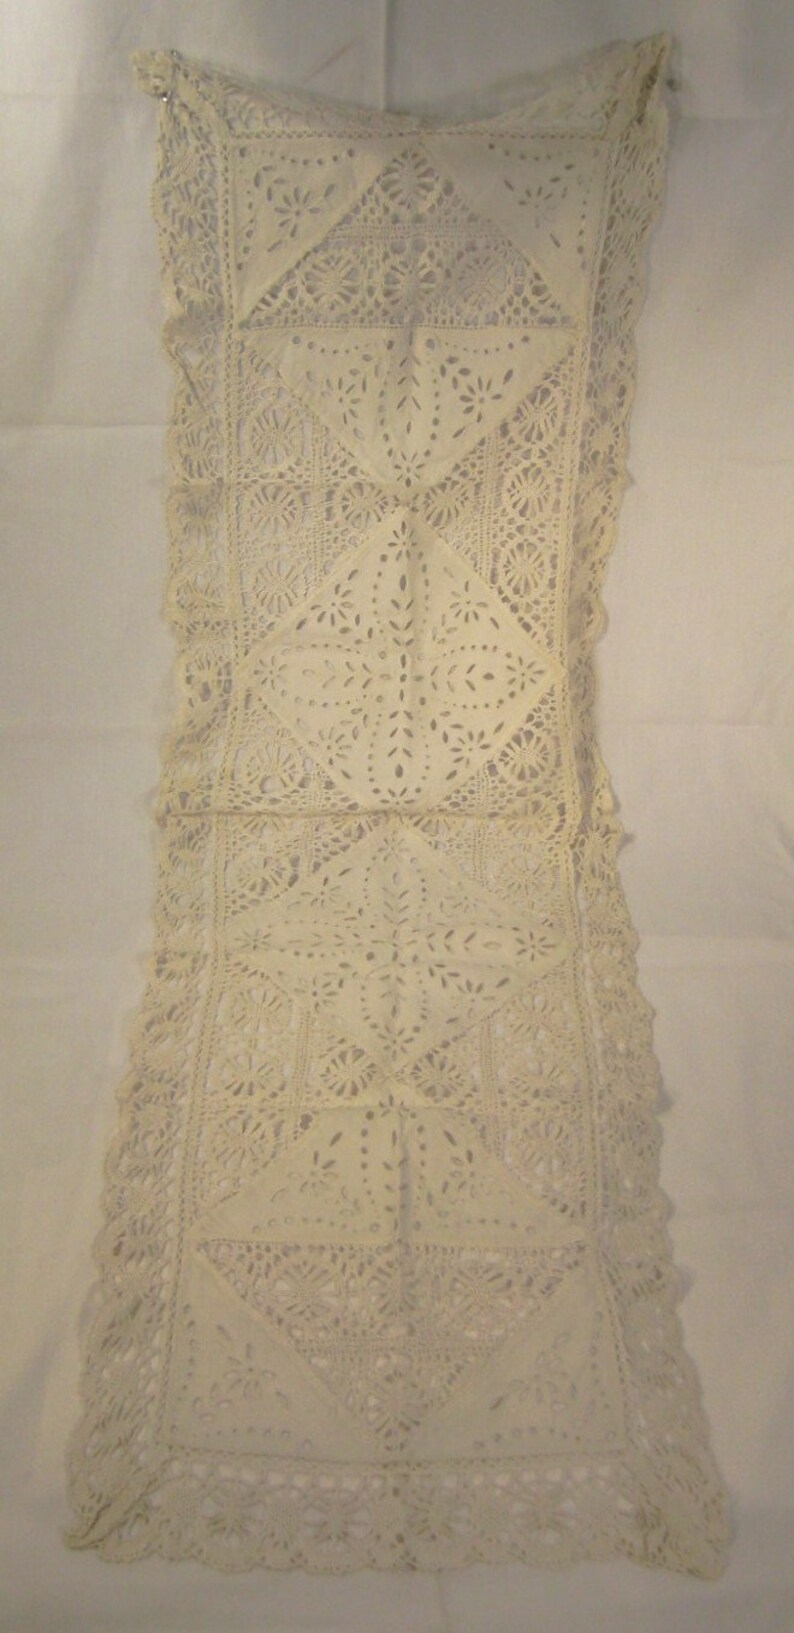 LACE Runner Cutout White open work and linen crochet Embroidered Floral Folk Art Openwork 54 x 17 image 5